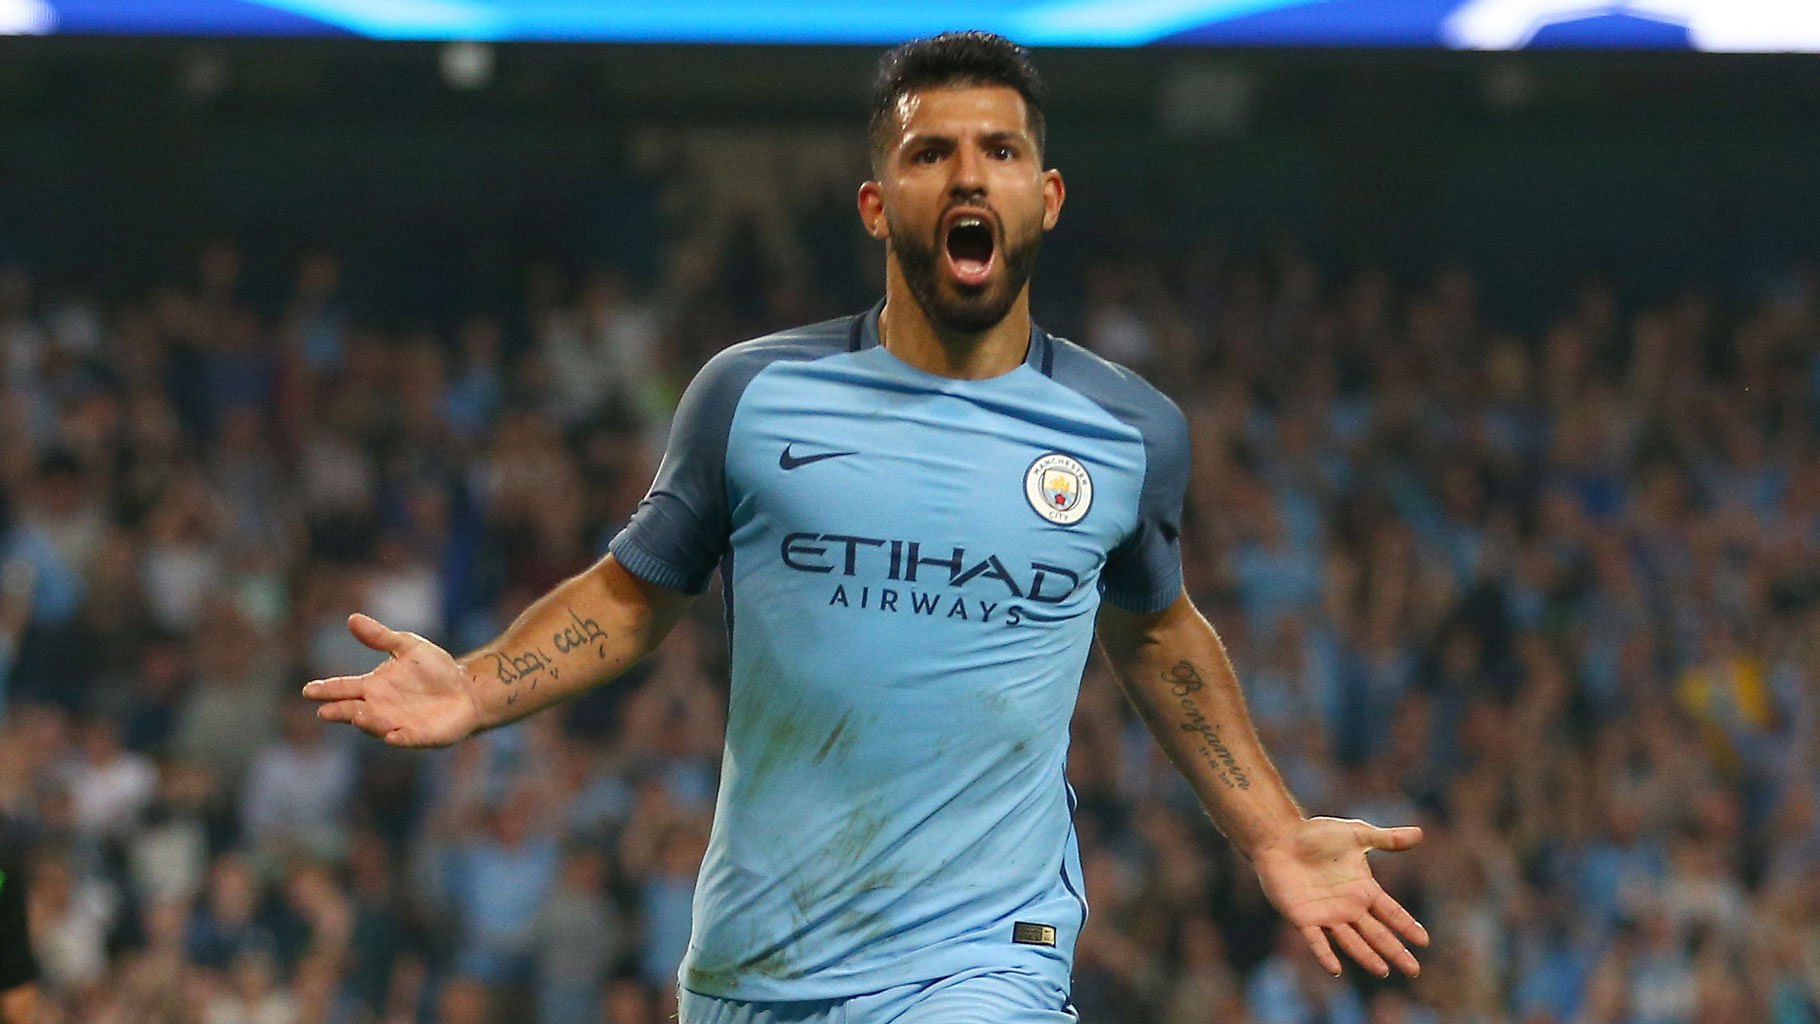 It is impossible to replace Sergio Aguero, feels Manchester City manager Pep Guardiola.